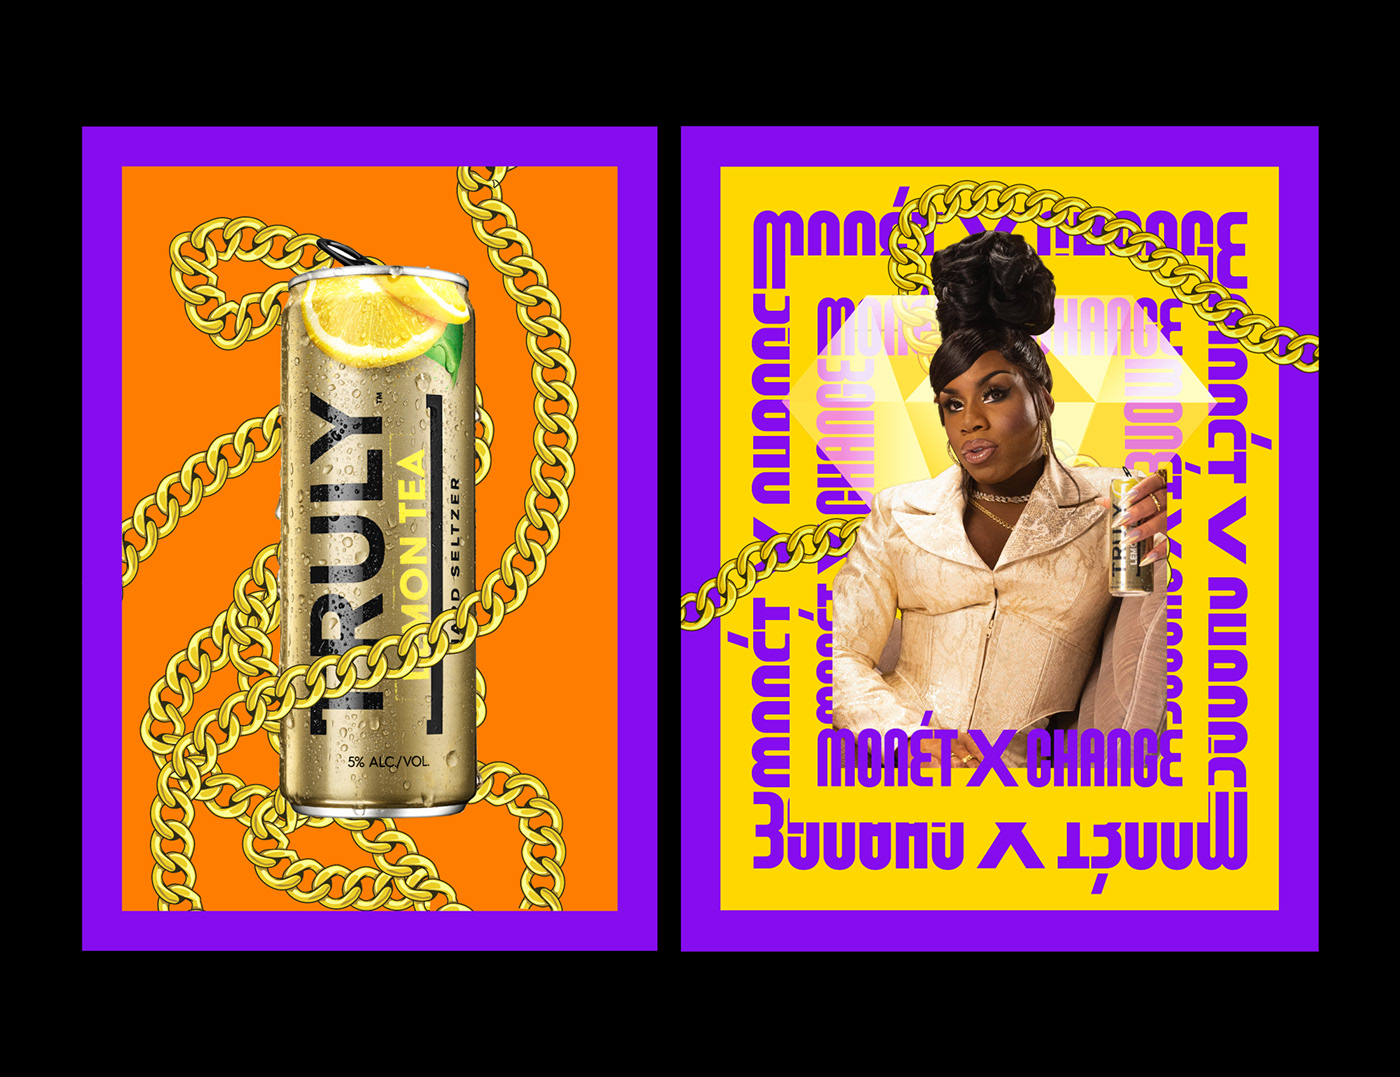 beverages Event hard iced tea Iced tea launch livestream monet x change social media truly